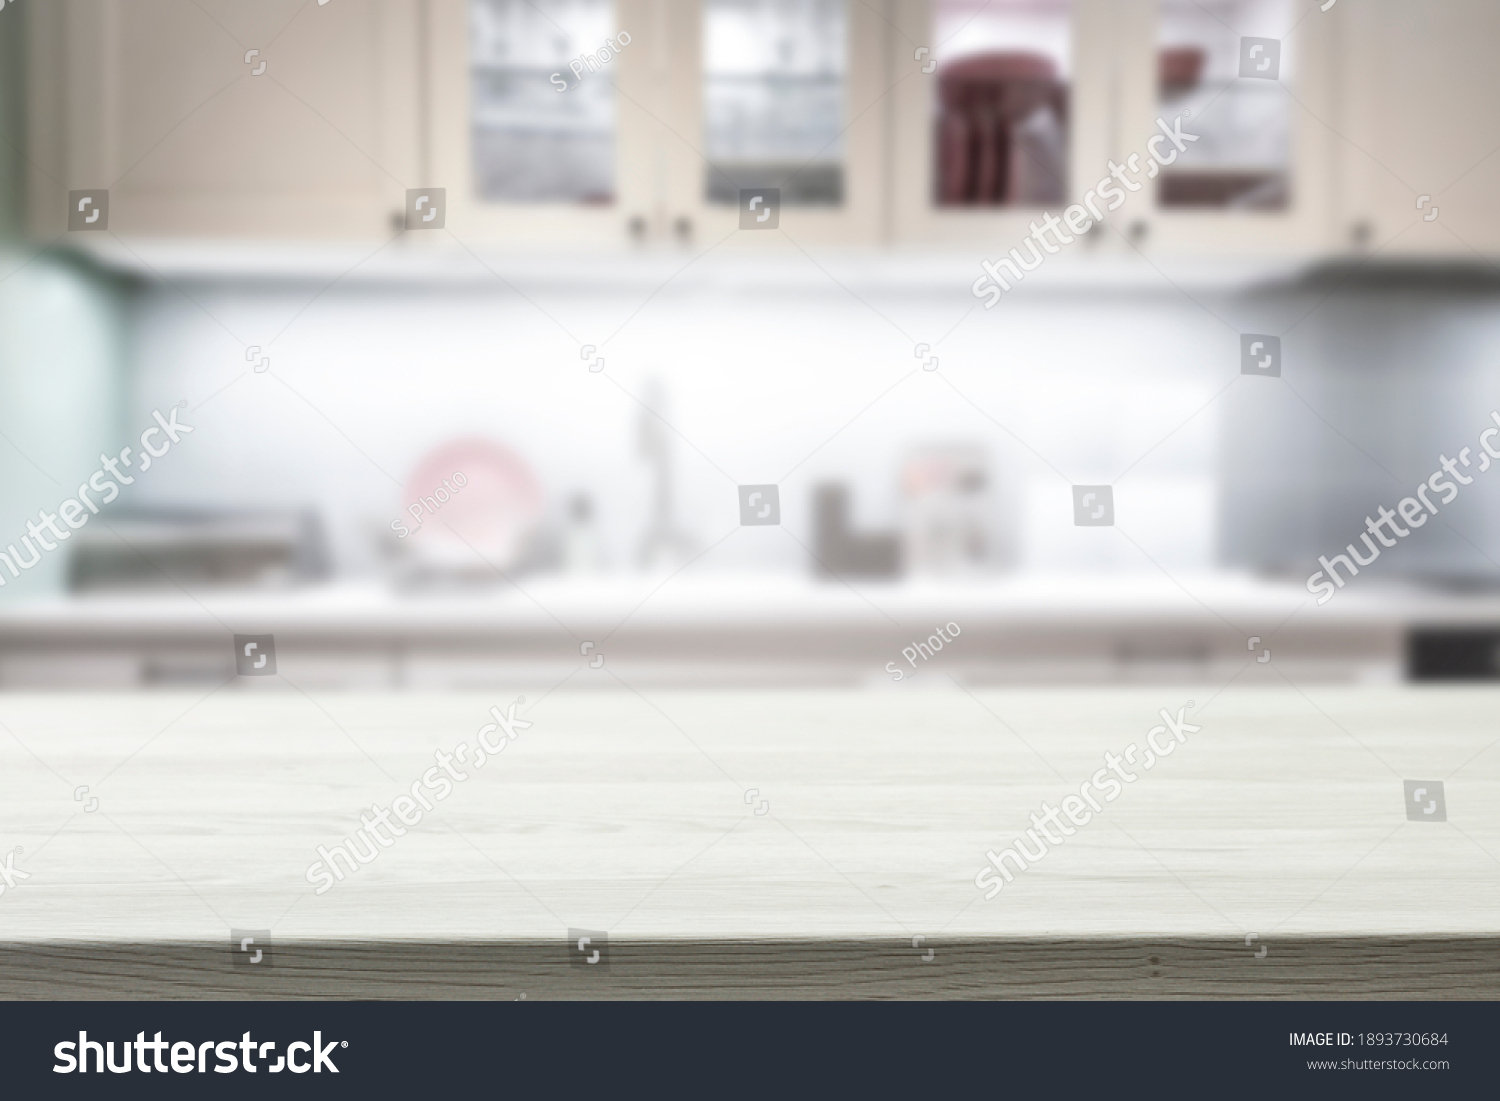 11,755,155 Cooking background Images, Stock Photos & Vectors | Shutterstock